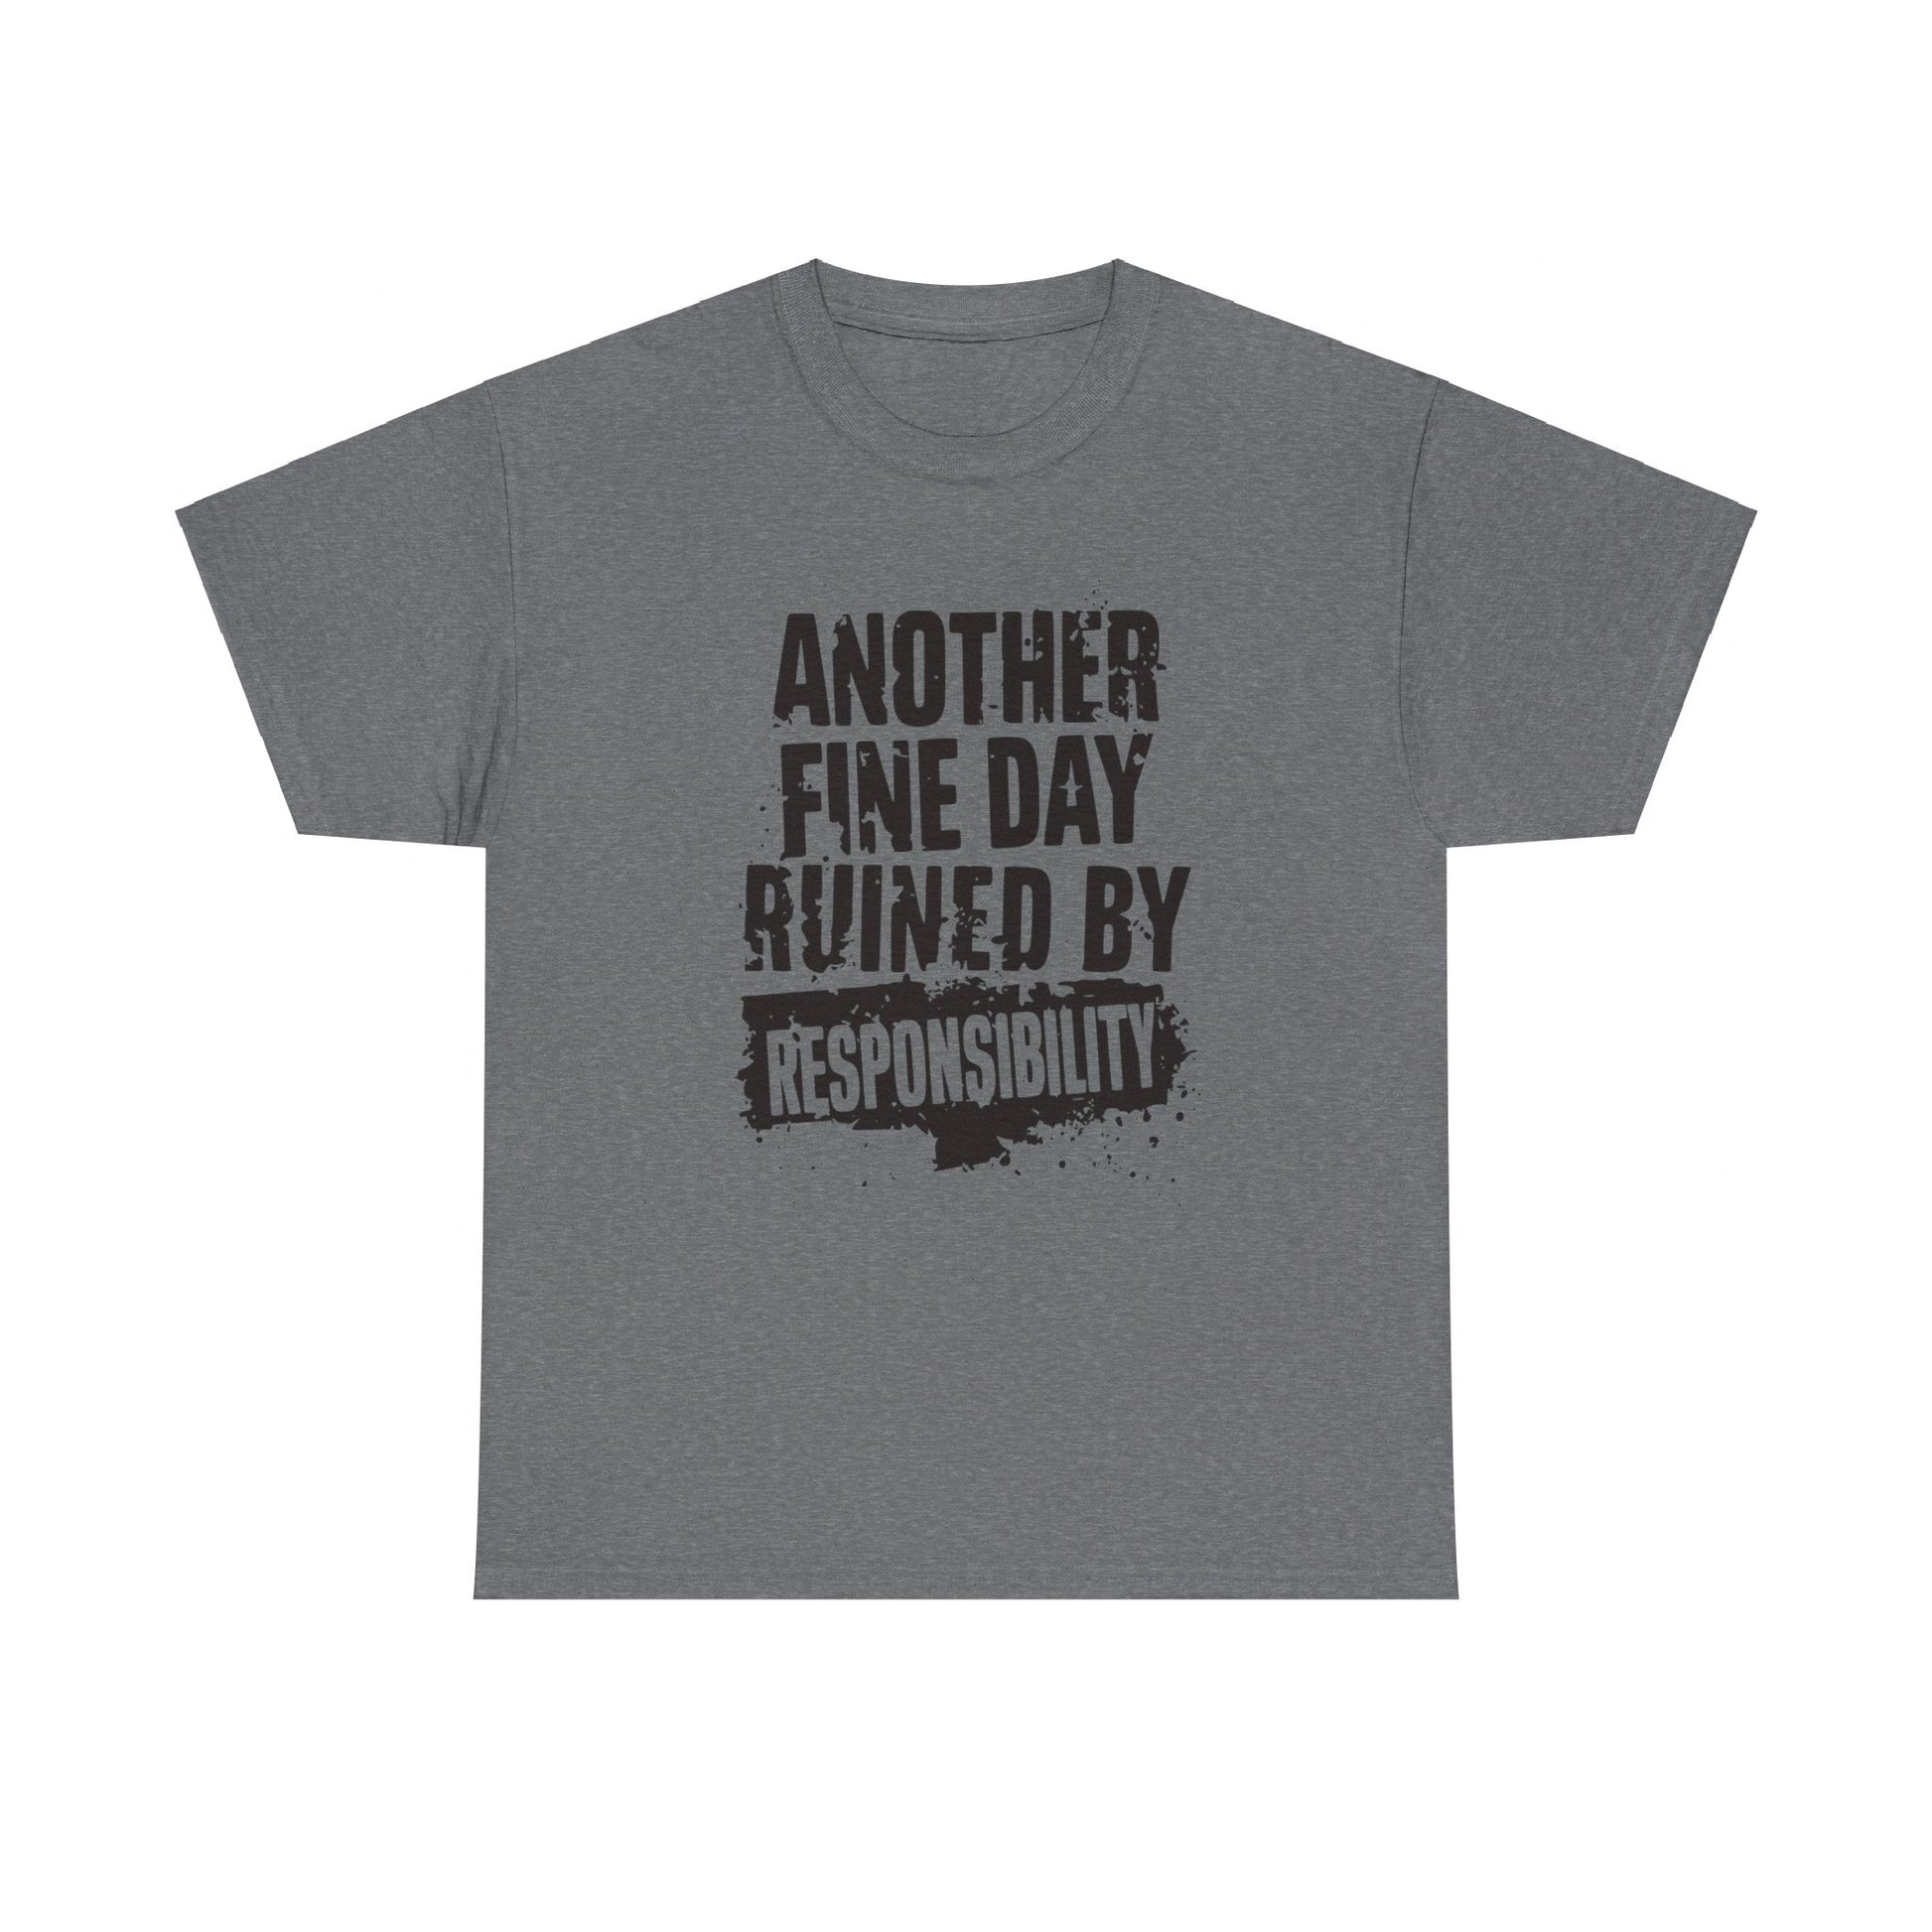 "Grunge Style Funny T-Shirt for Hard-Working Individuals"